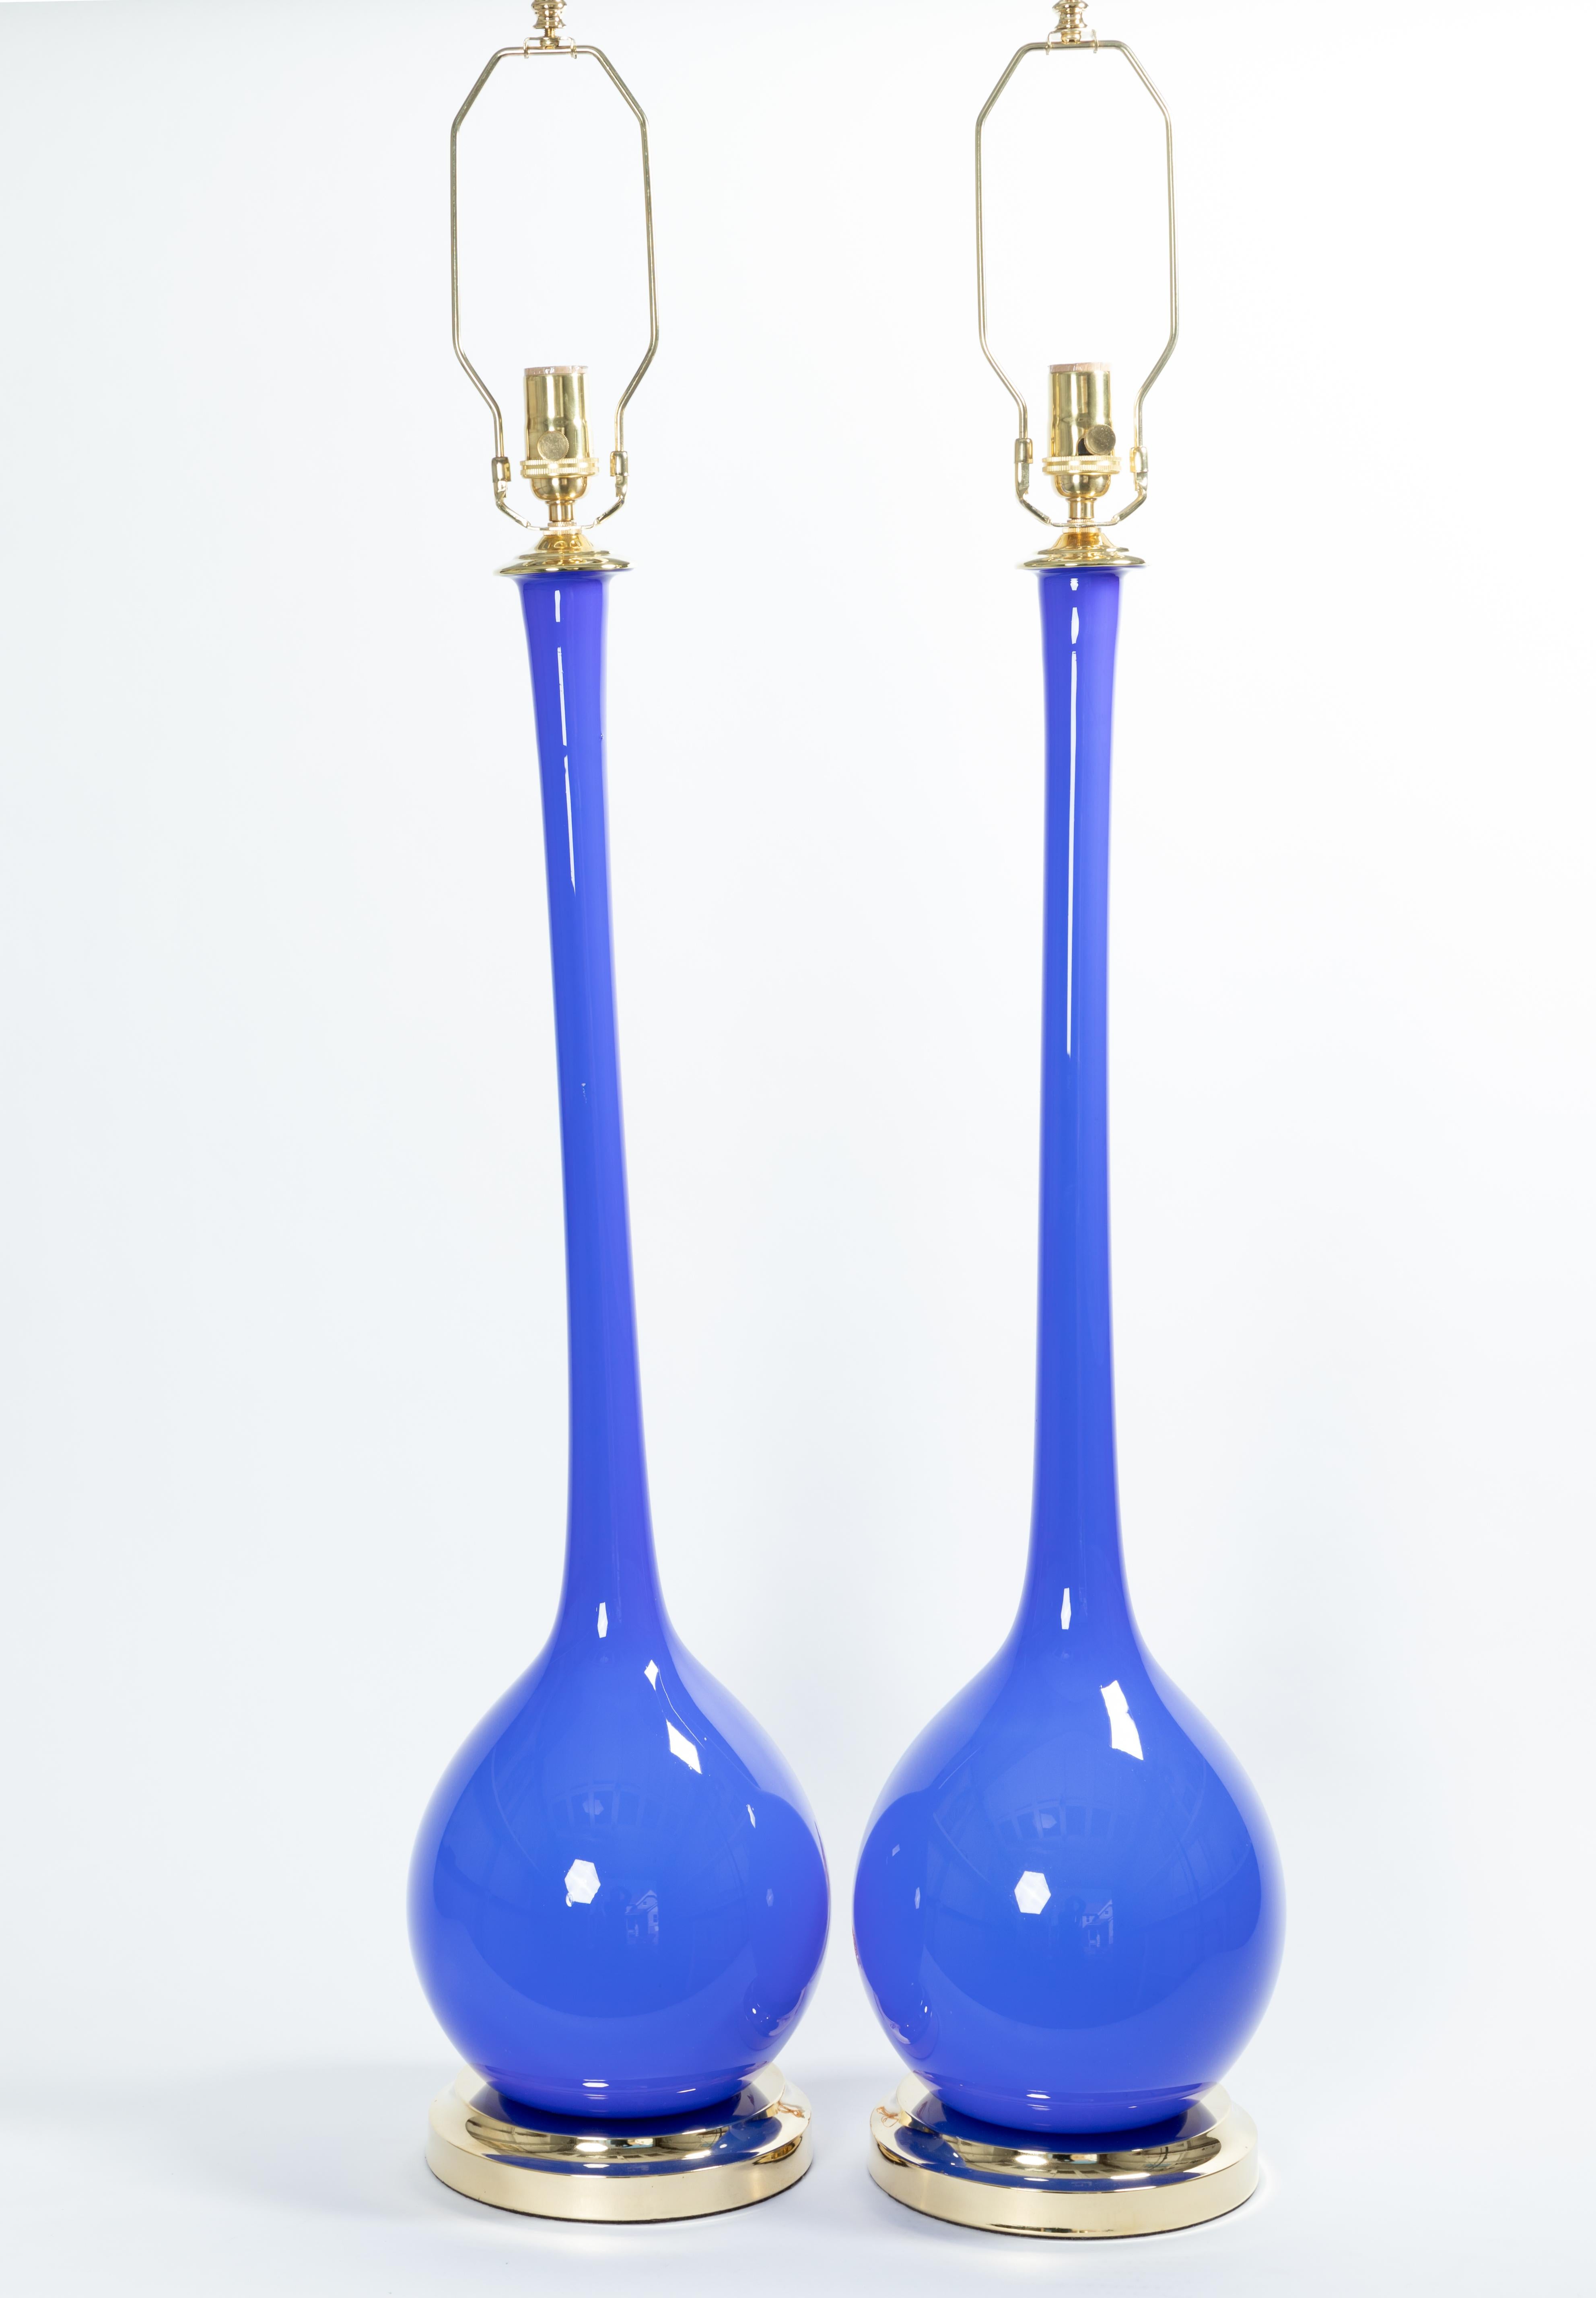 Pair of tall long neck blue Murano glass table lamps with brass detail.